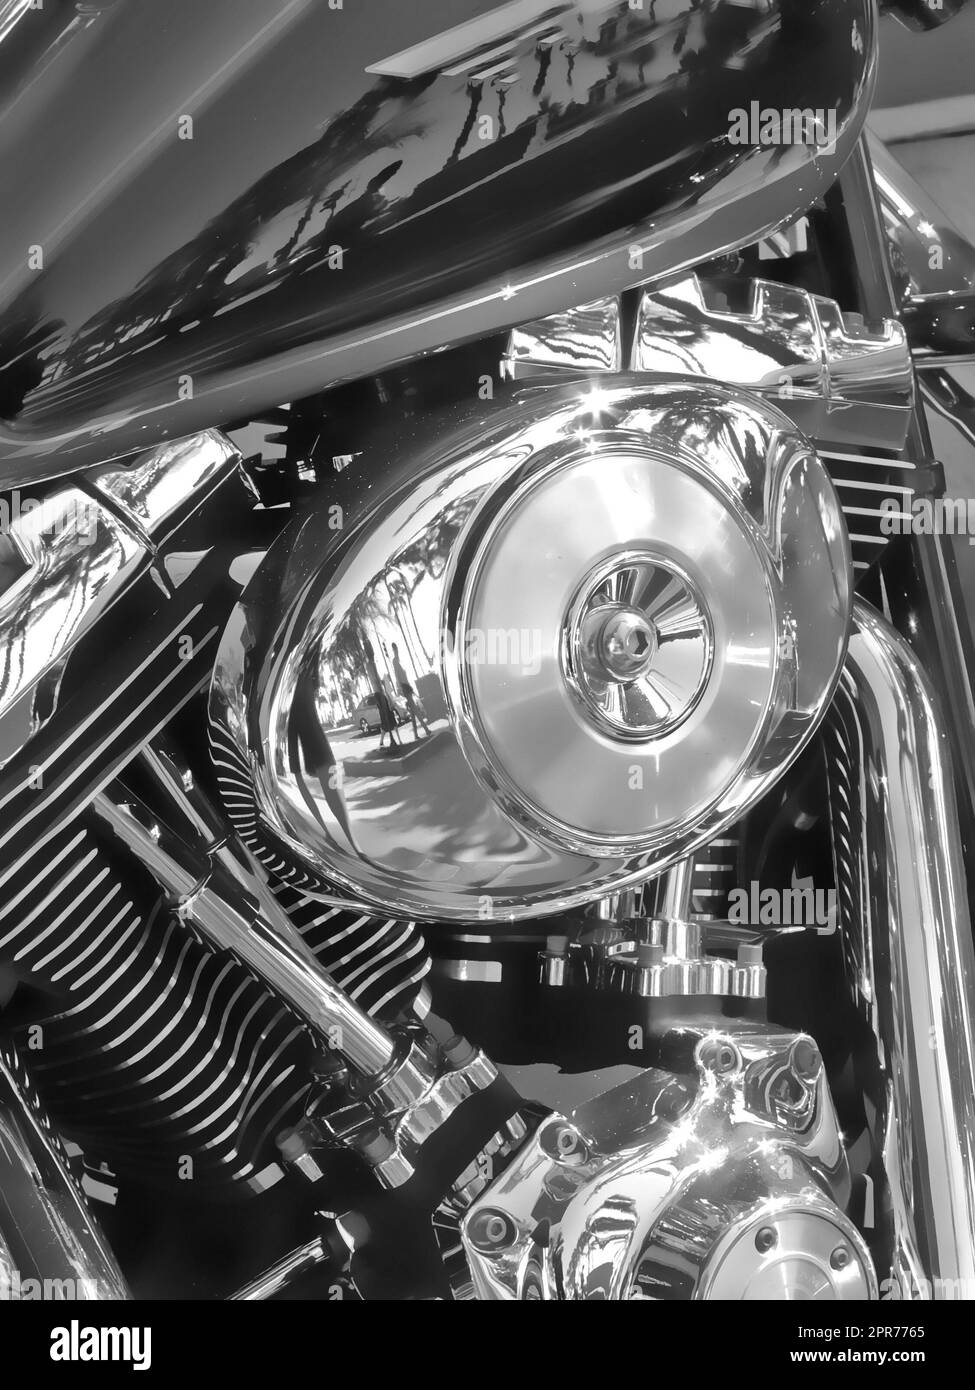 Closeup of metallic motorcycle engine details. A classic, shiny chrome motorbike engine at a motorcycle repair shop. Zoom in on a silver design, black motorbike during annual service at a garage Stock Photo